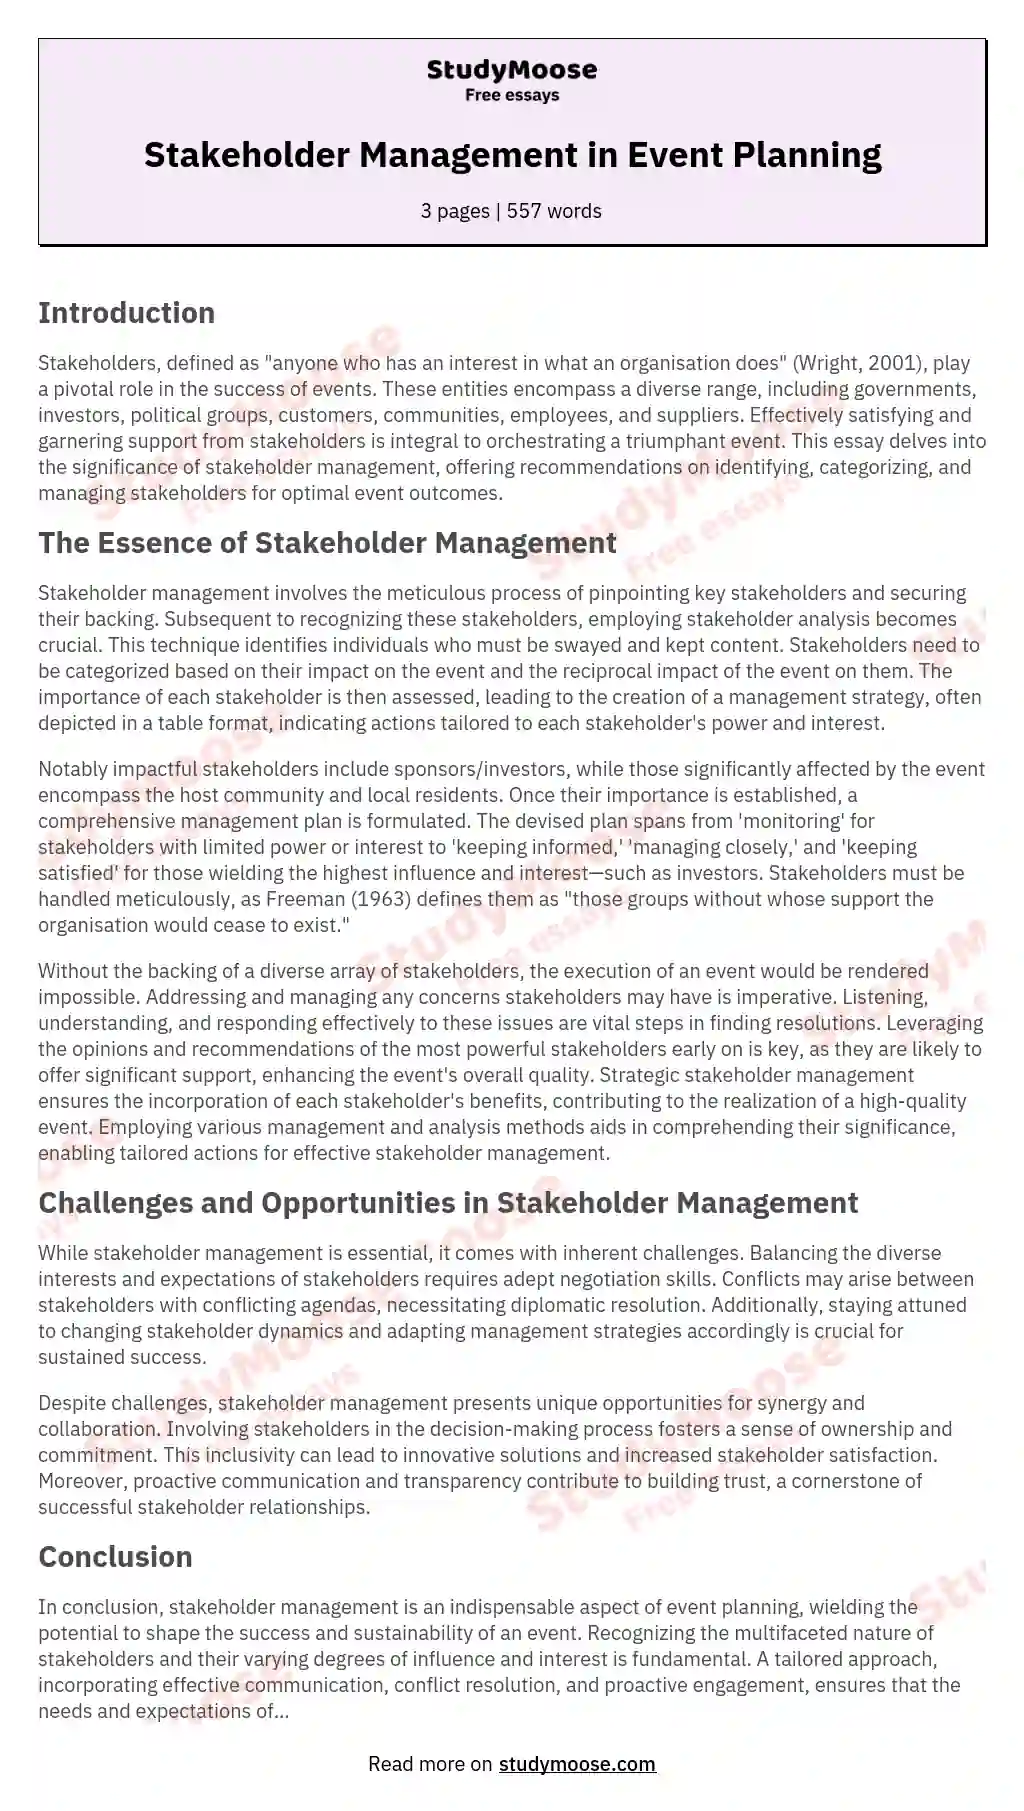 Stakeholder Management in Event Planning essay